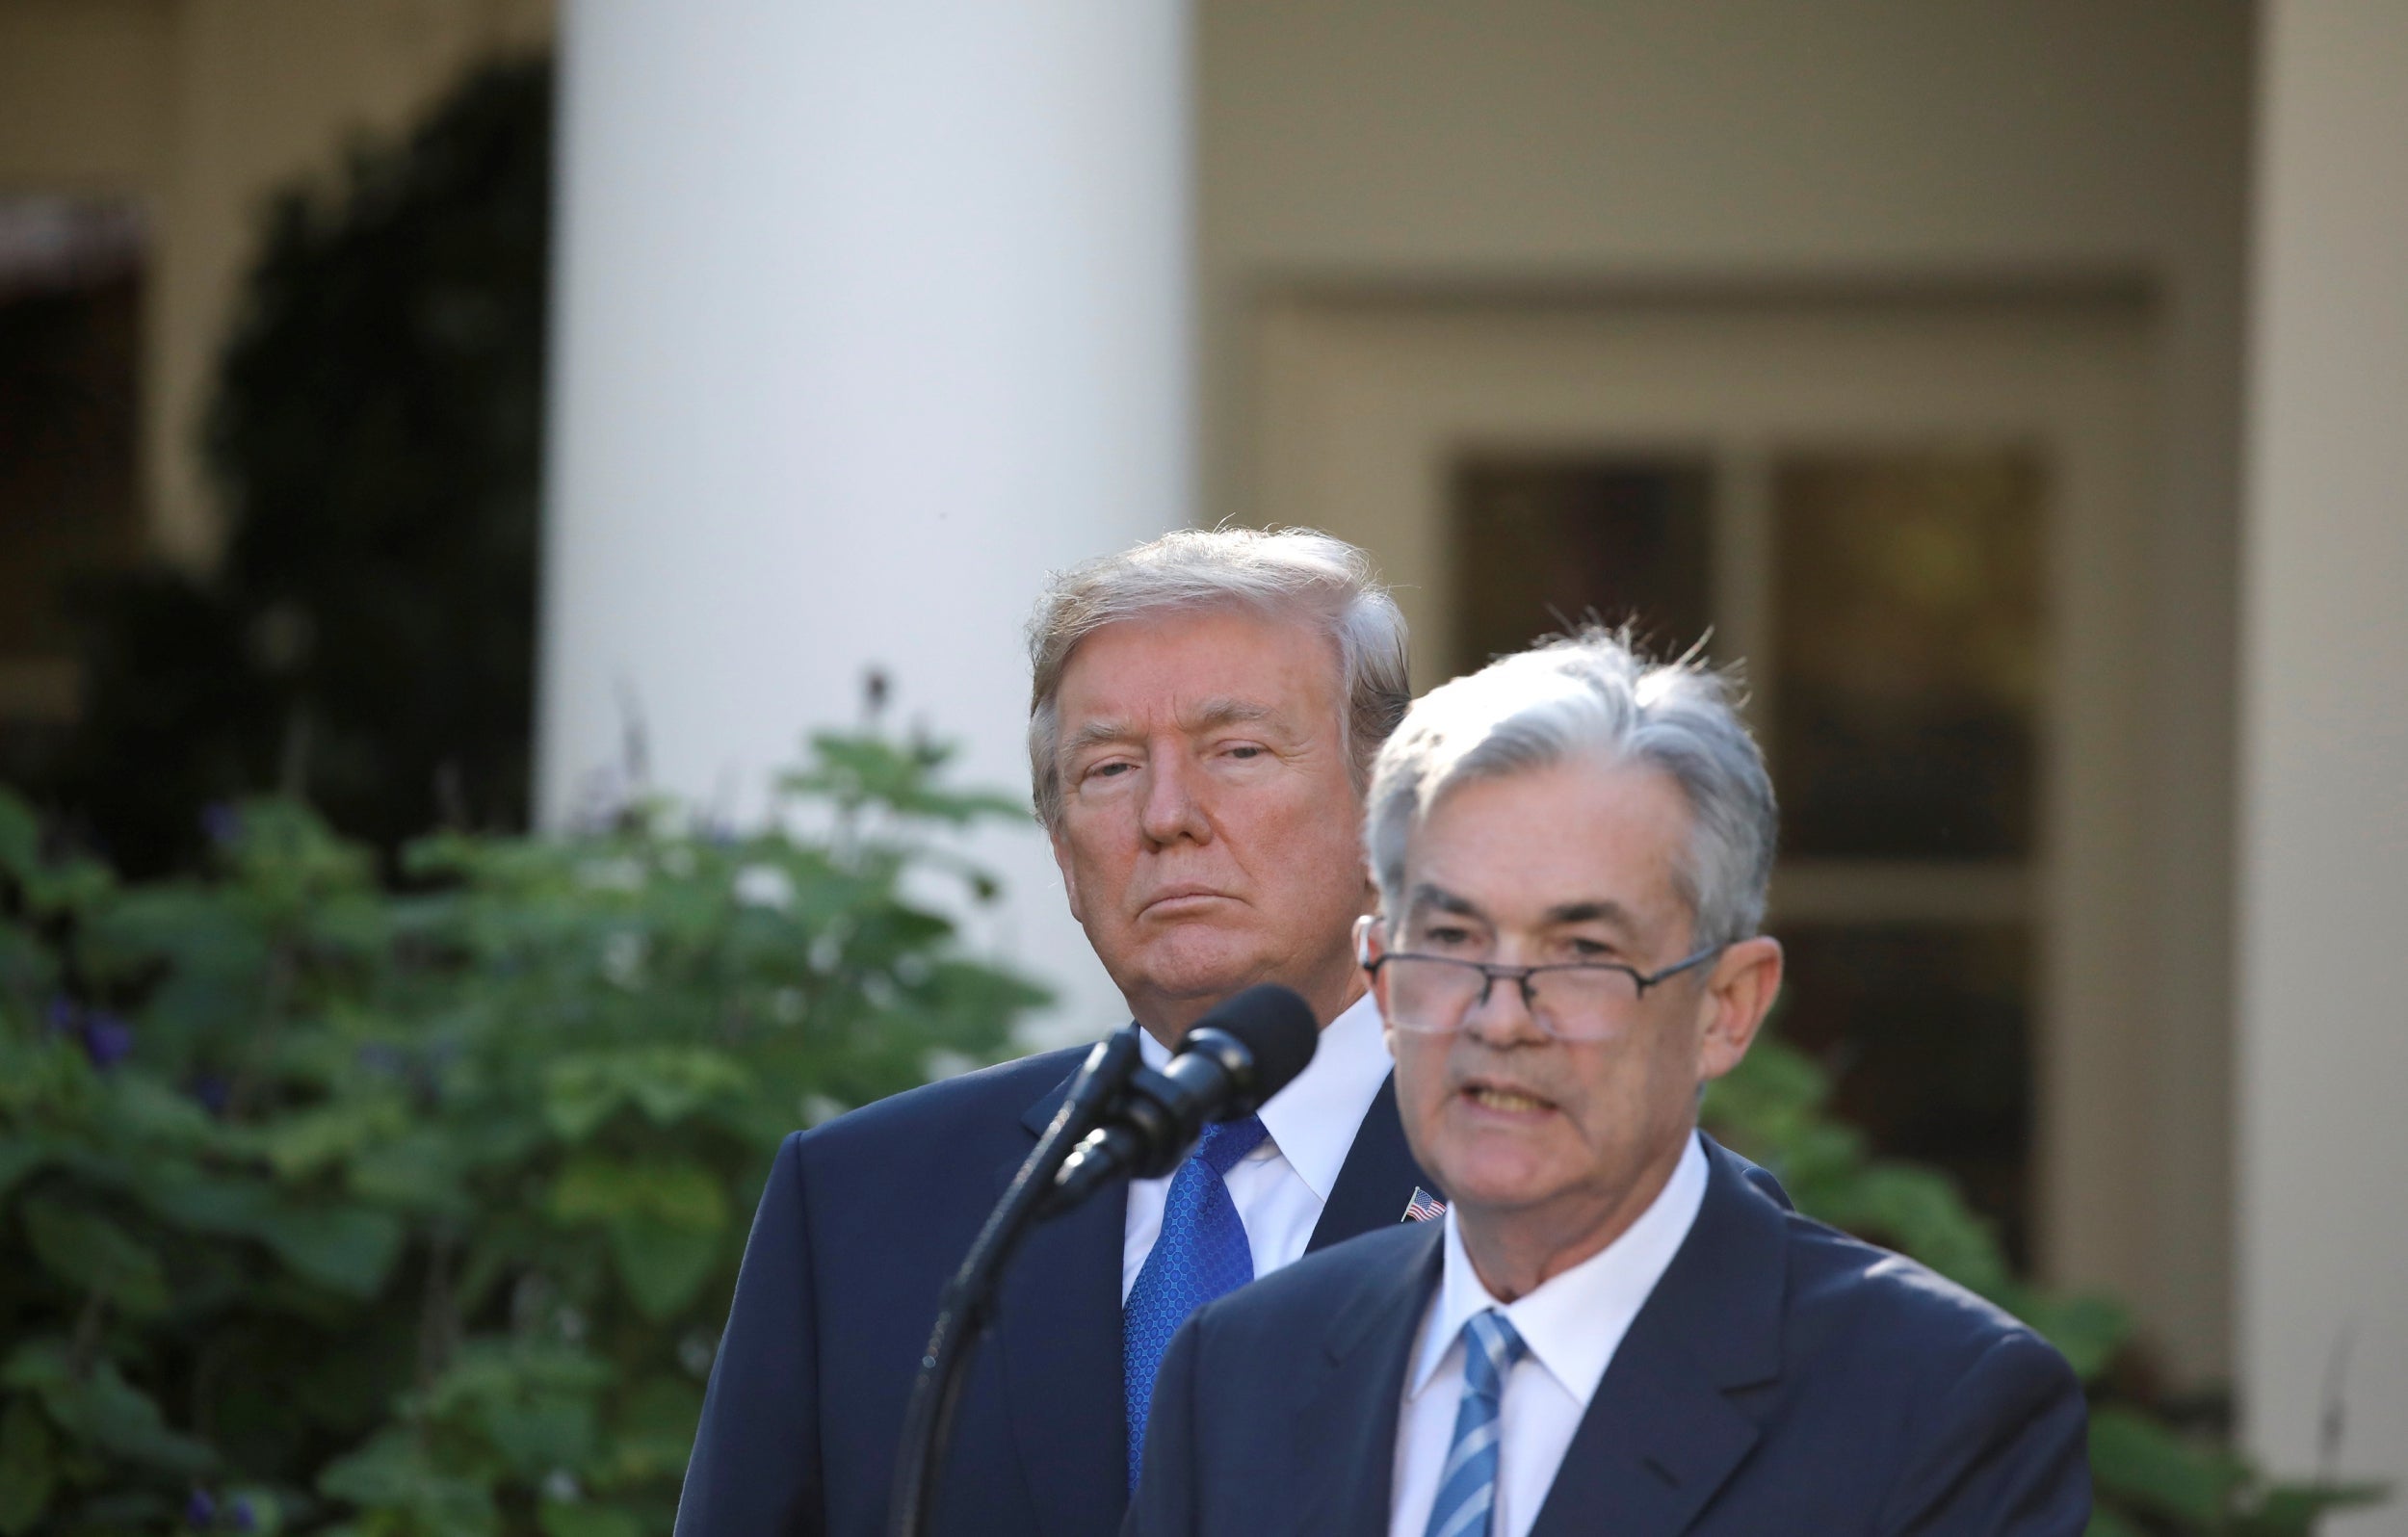 President Donald Trump with Jerome Powell, chairman of the Federal Reserve